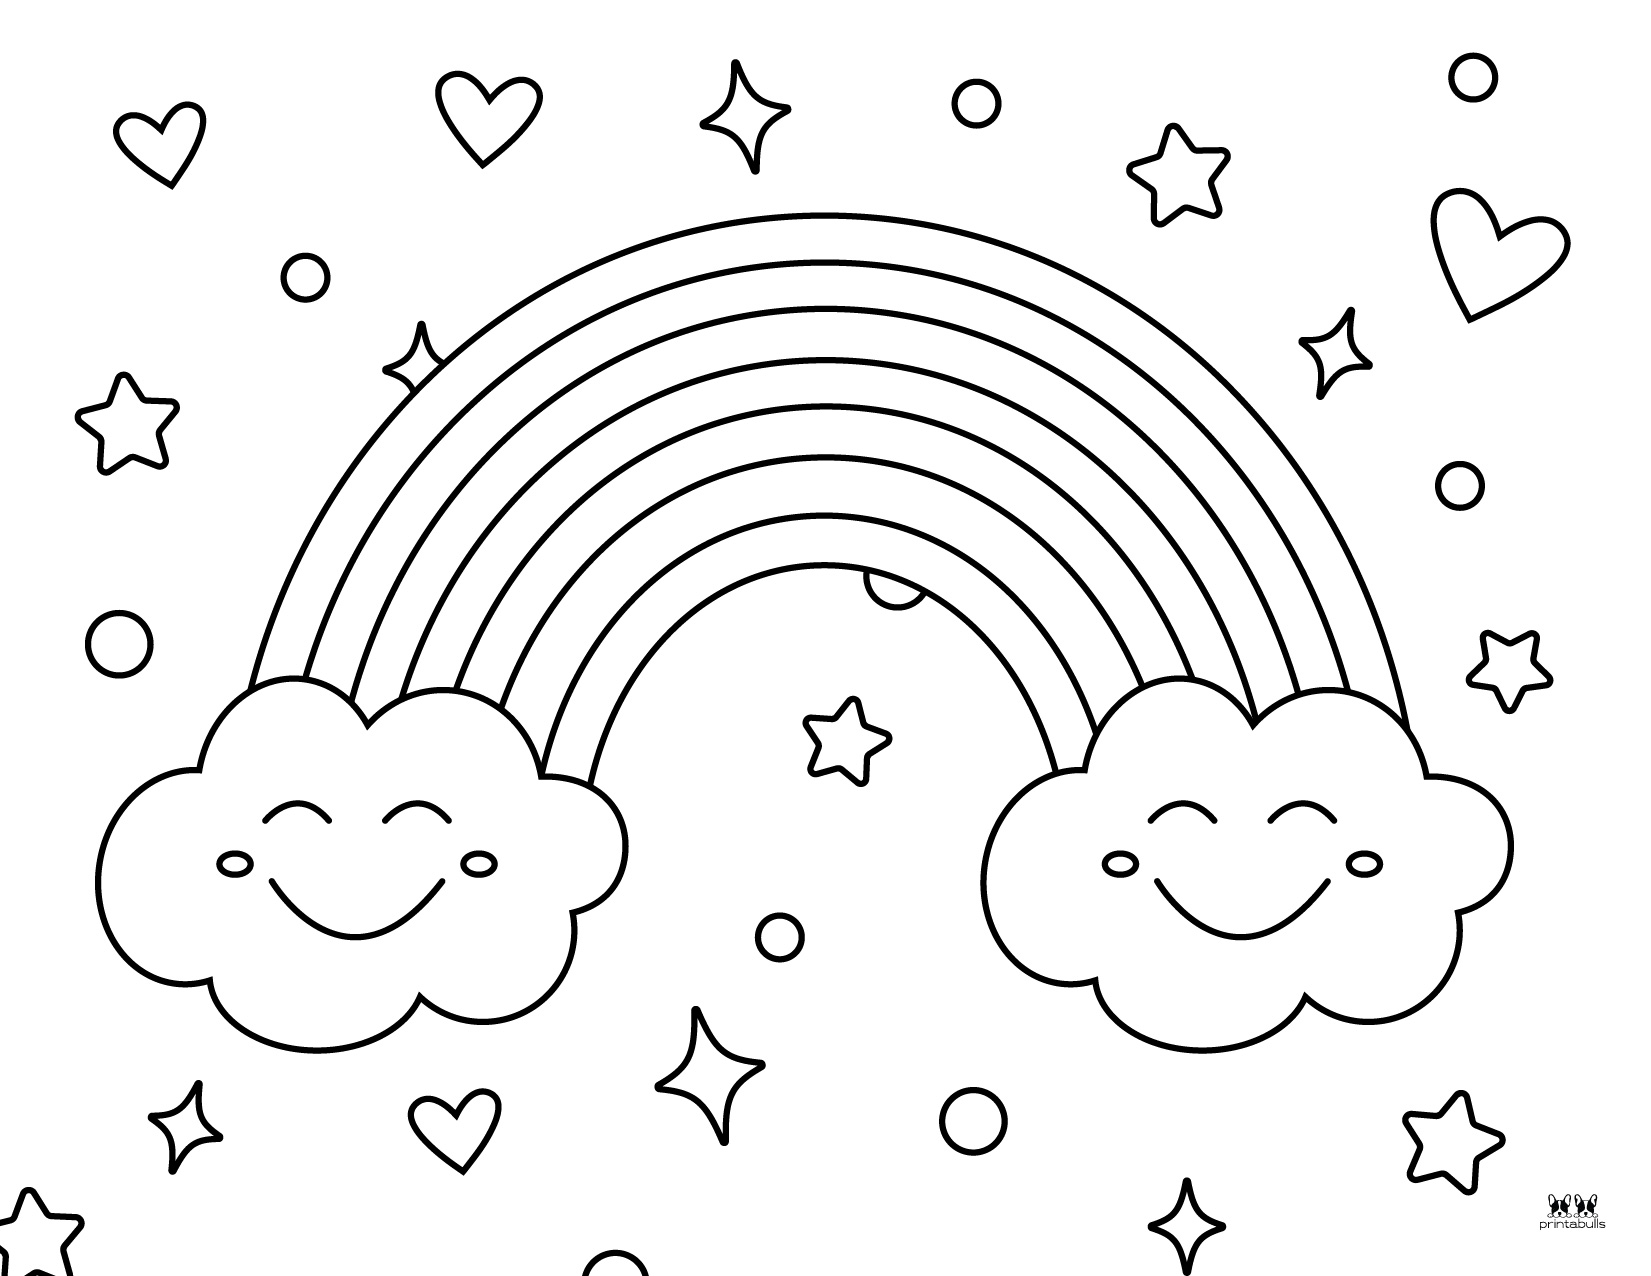 Rainbow Coloring Pages - rainbow and clouds coloring page free ...